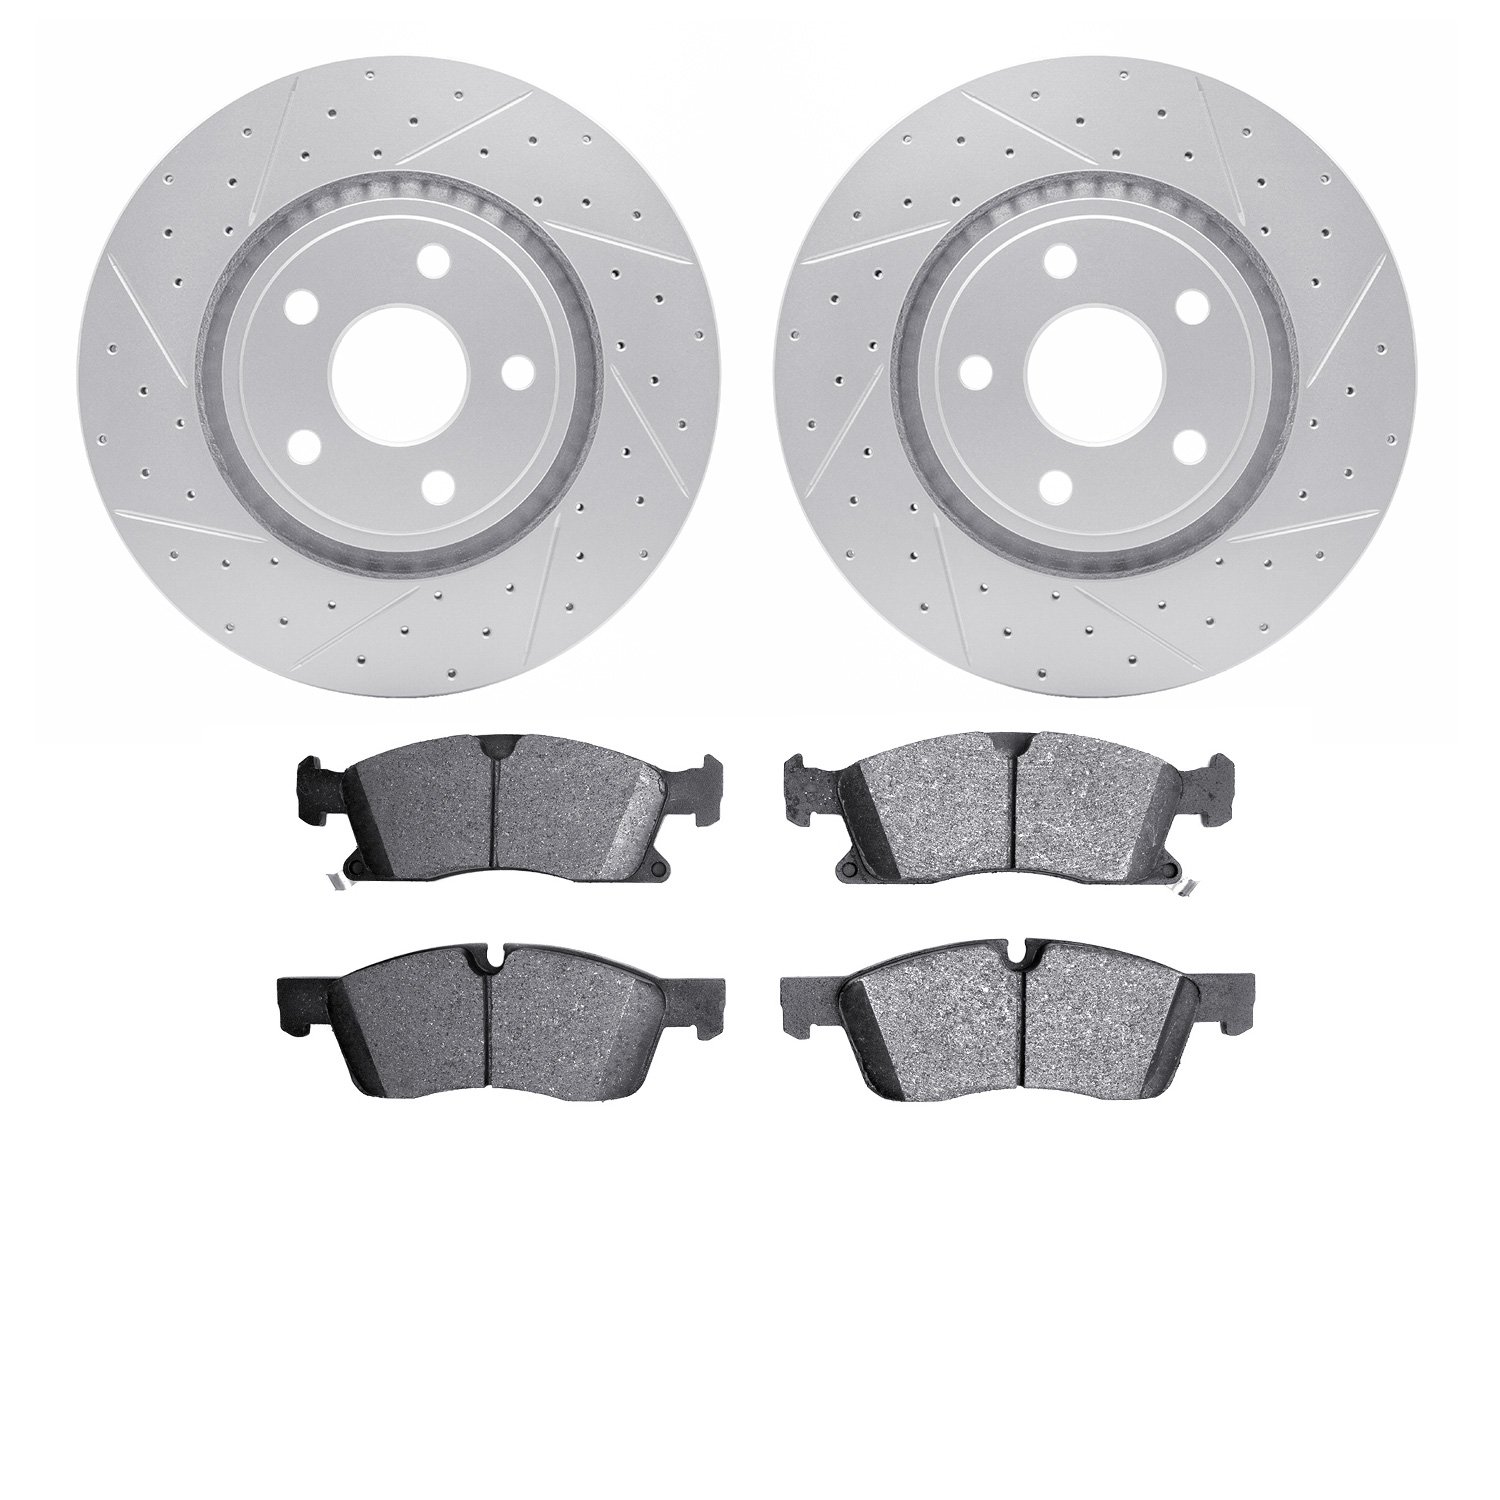 2202-42004 Geoperformance Drilled/Slotted Rotors w/Heavy-Duty Pads Kit, Fits Select Mopar, Position: Front